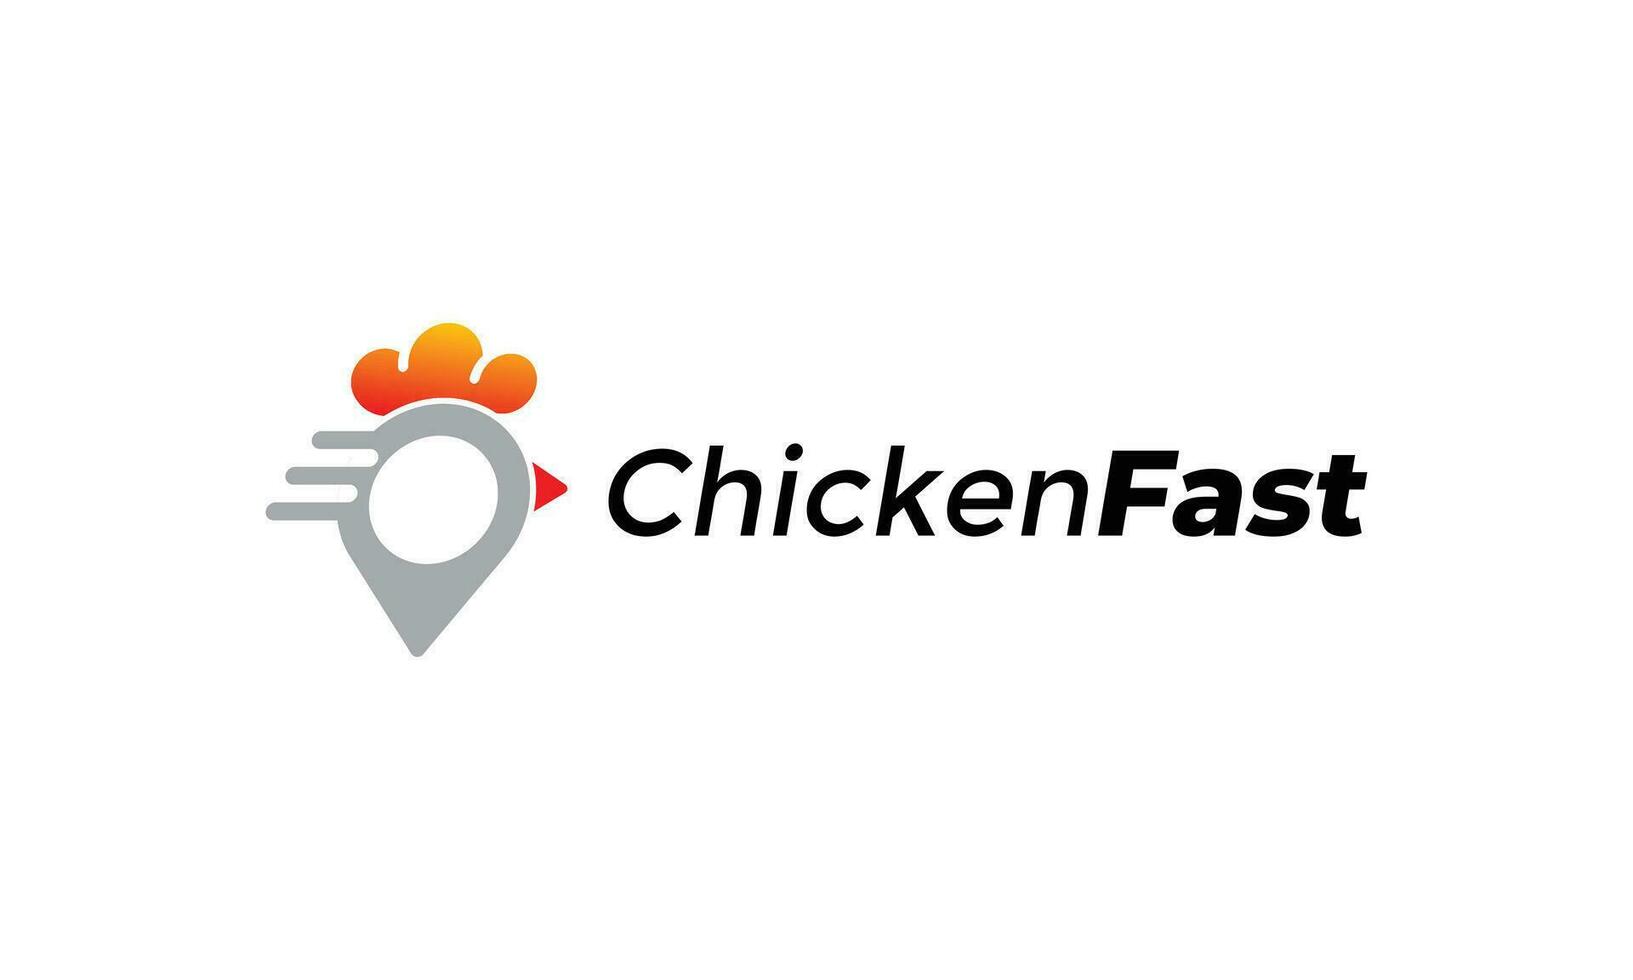 Chicken map food location logo for food eatery business vector